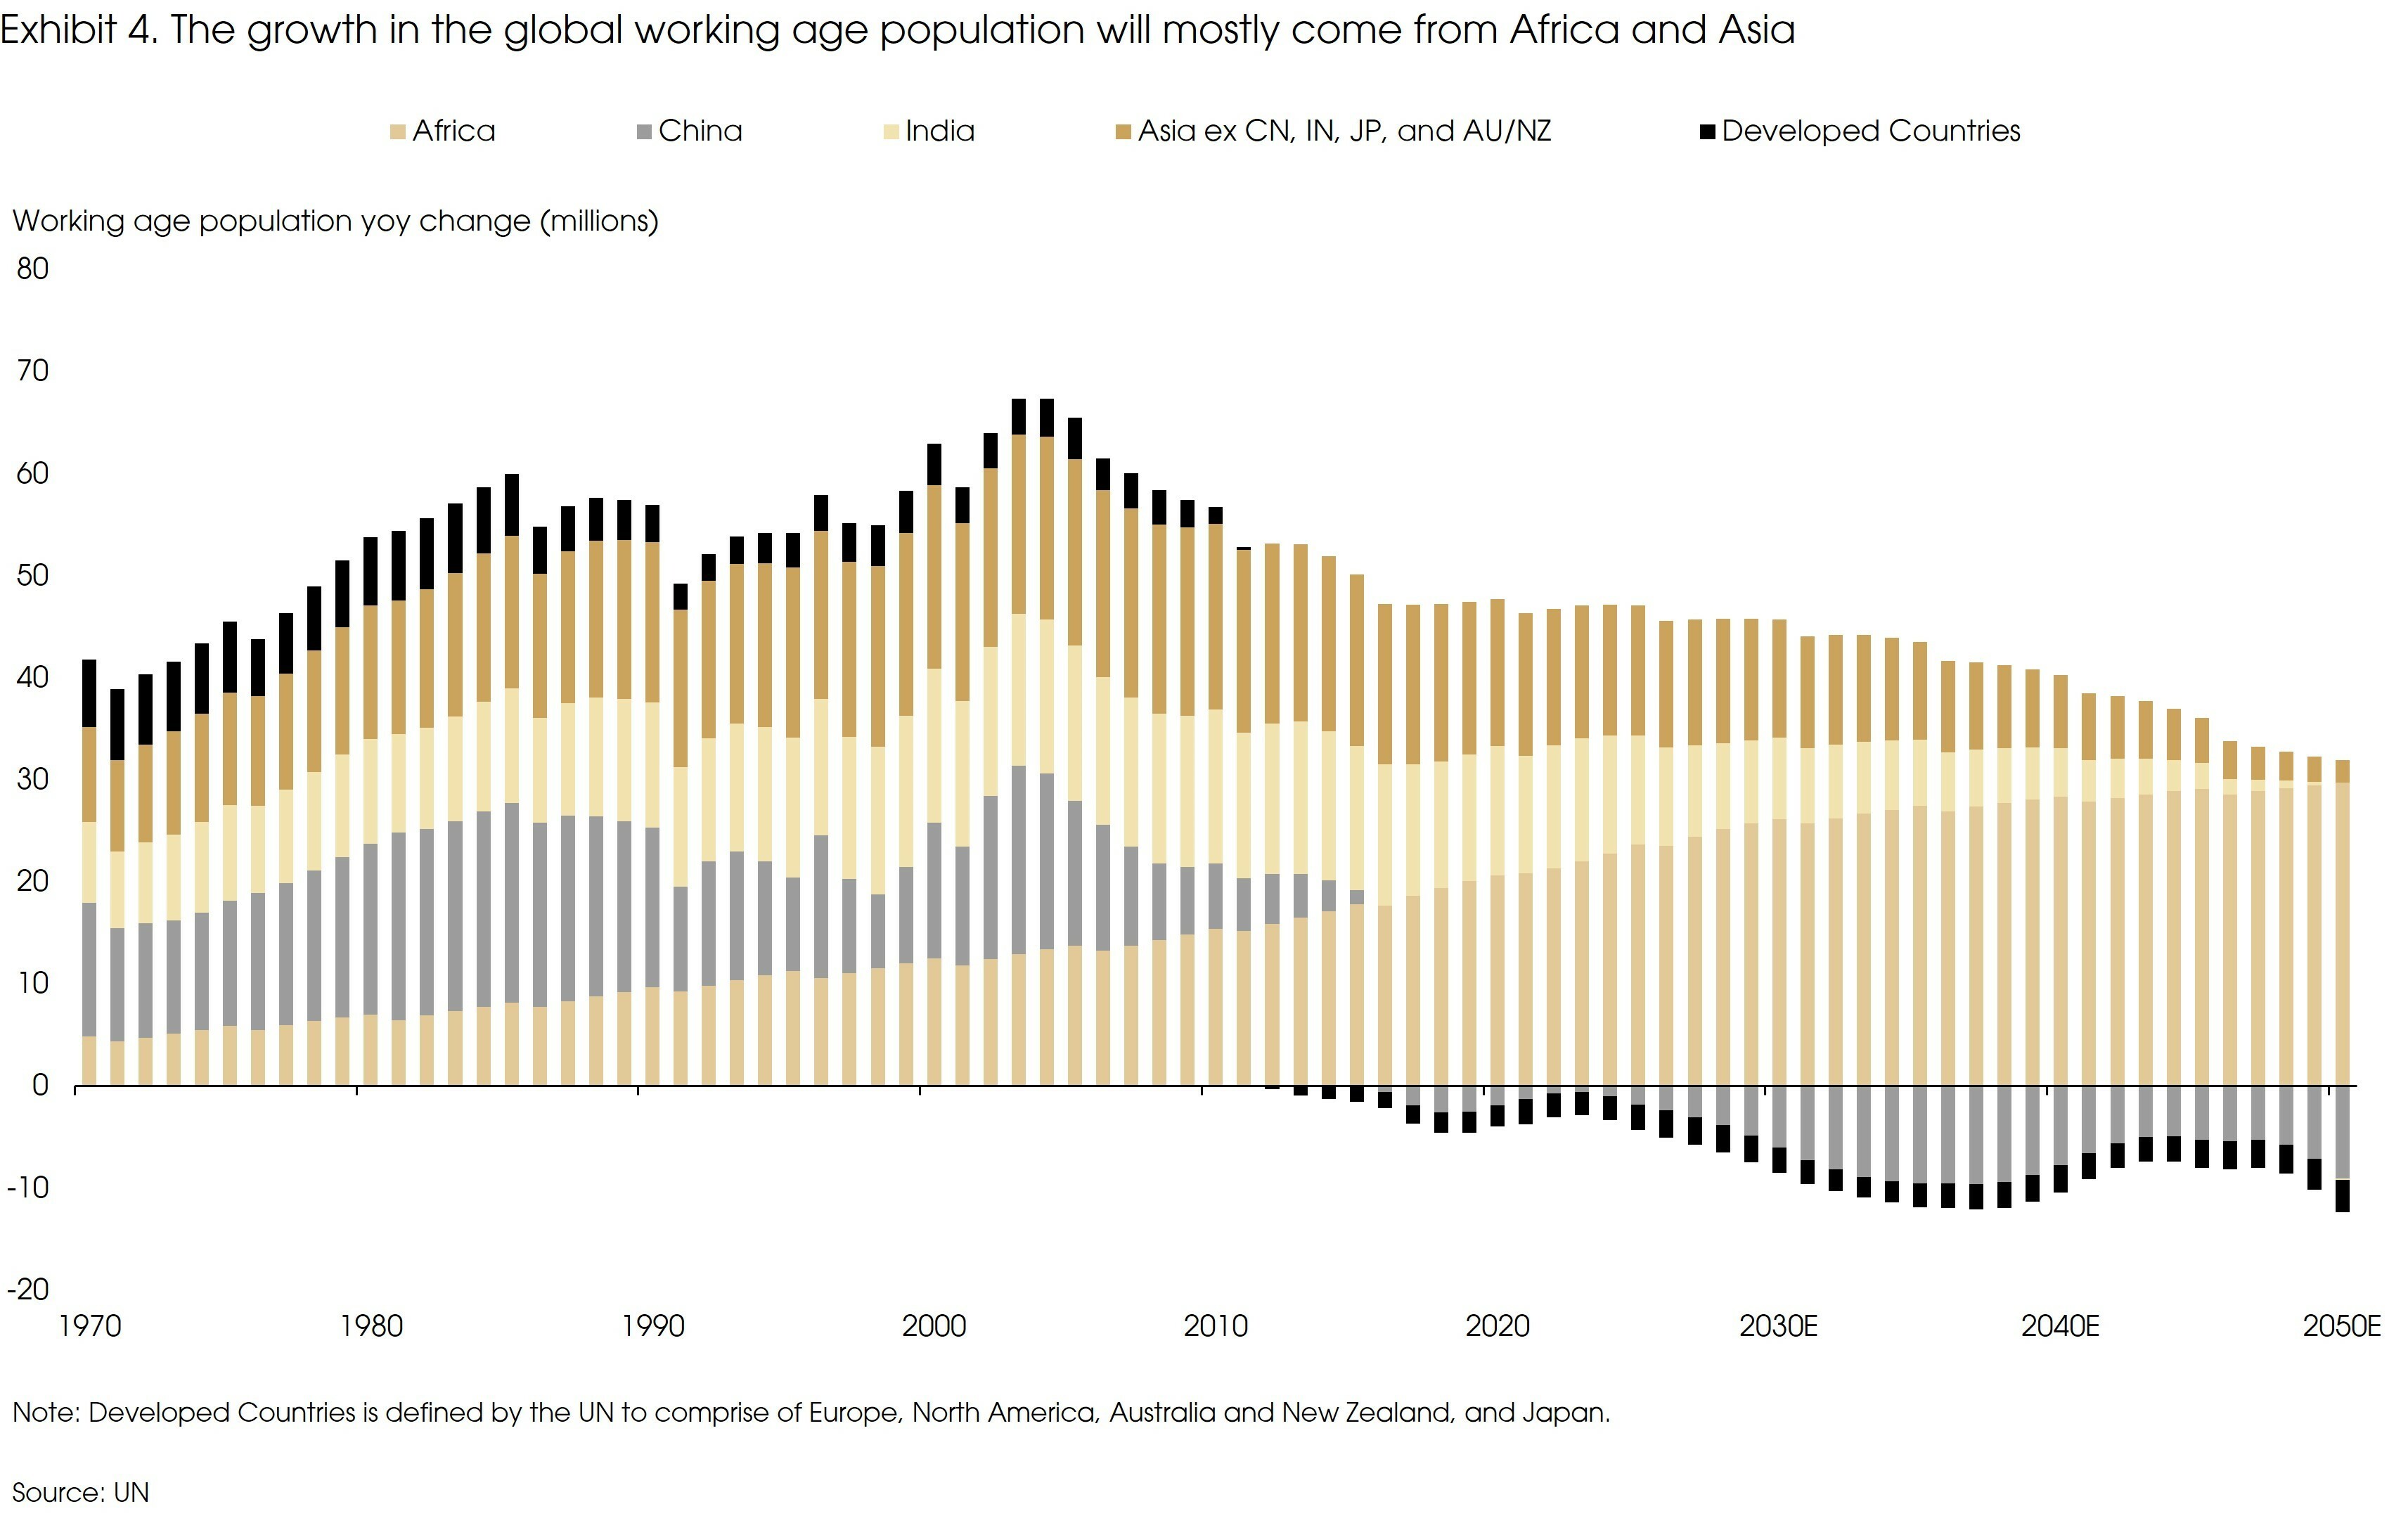 Exhibit 4 The Growth In The Global Working Age Population Will Mostly Come From Africa and Asia